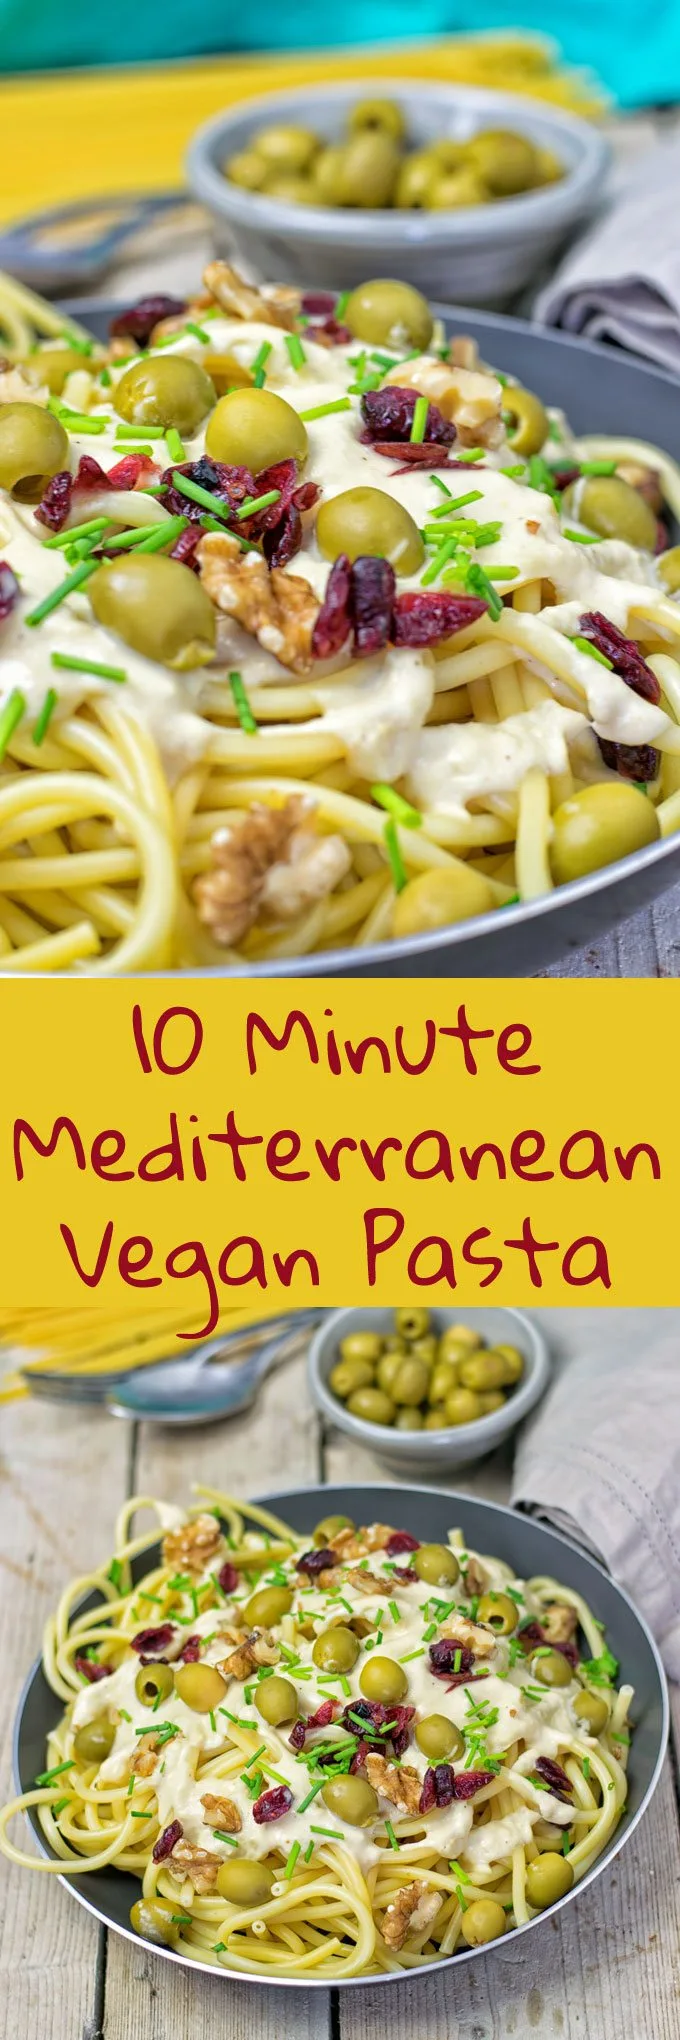 Collage of two pictures of the 10 Minute Mediterranean Vegan Pasta with recipe title text.